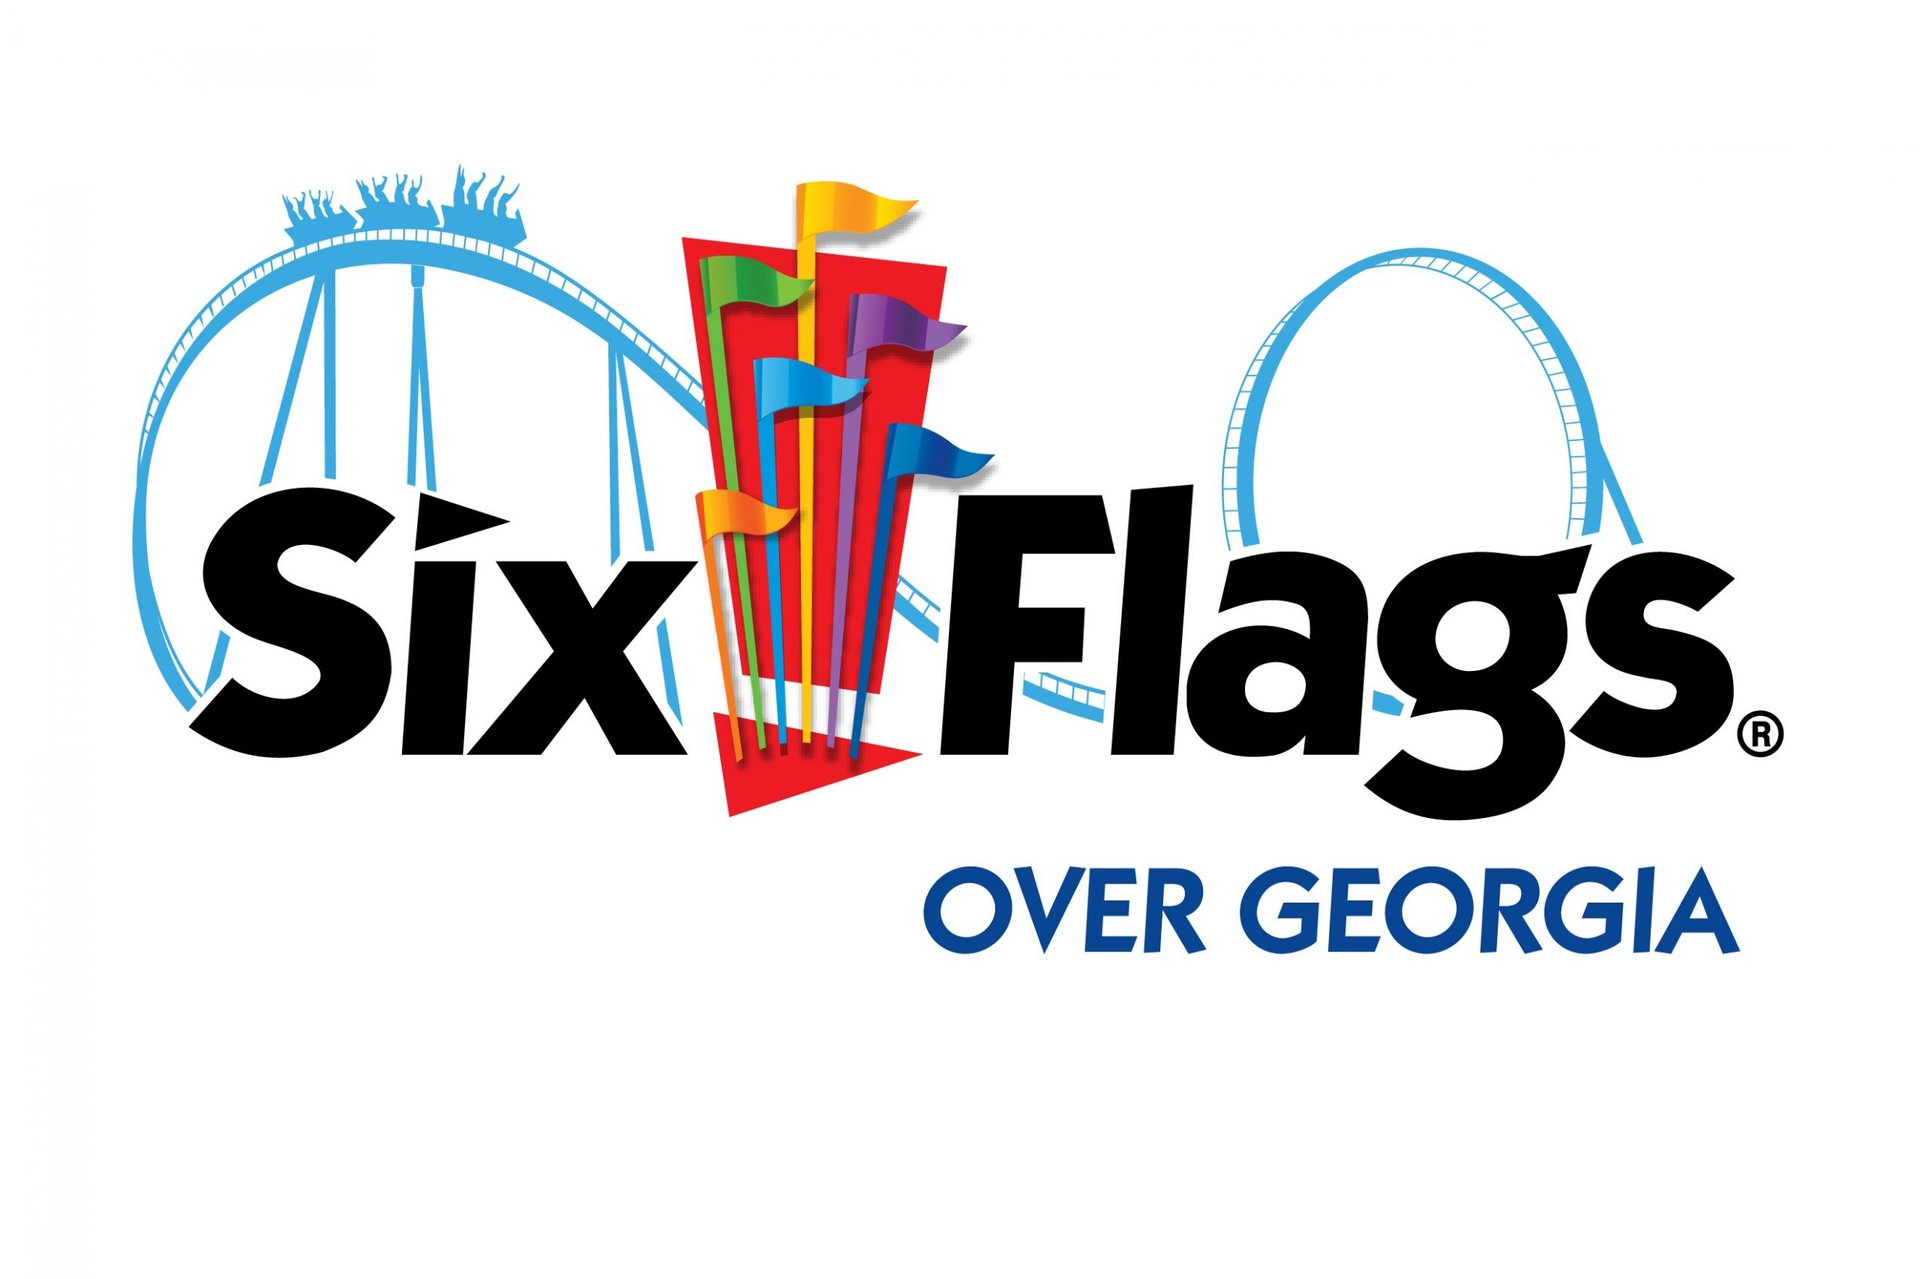 The logo for Six Flags Over Georgia